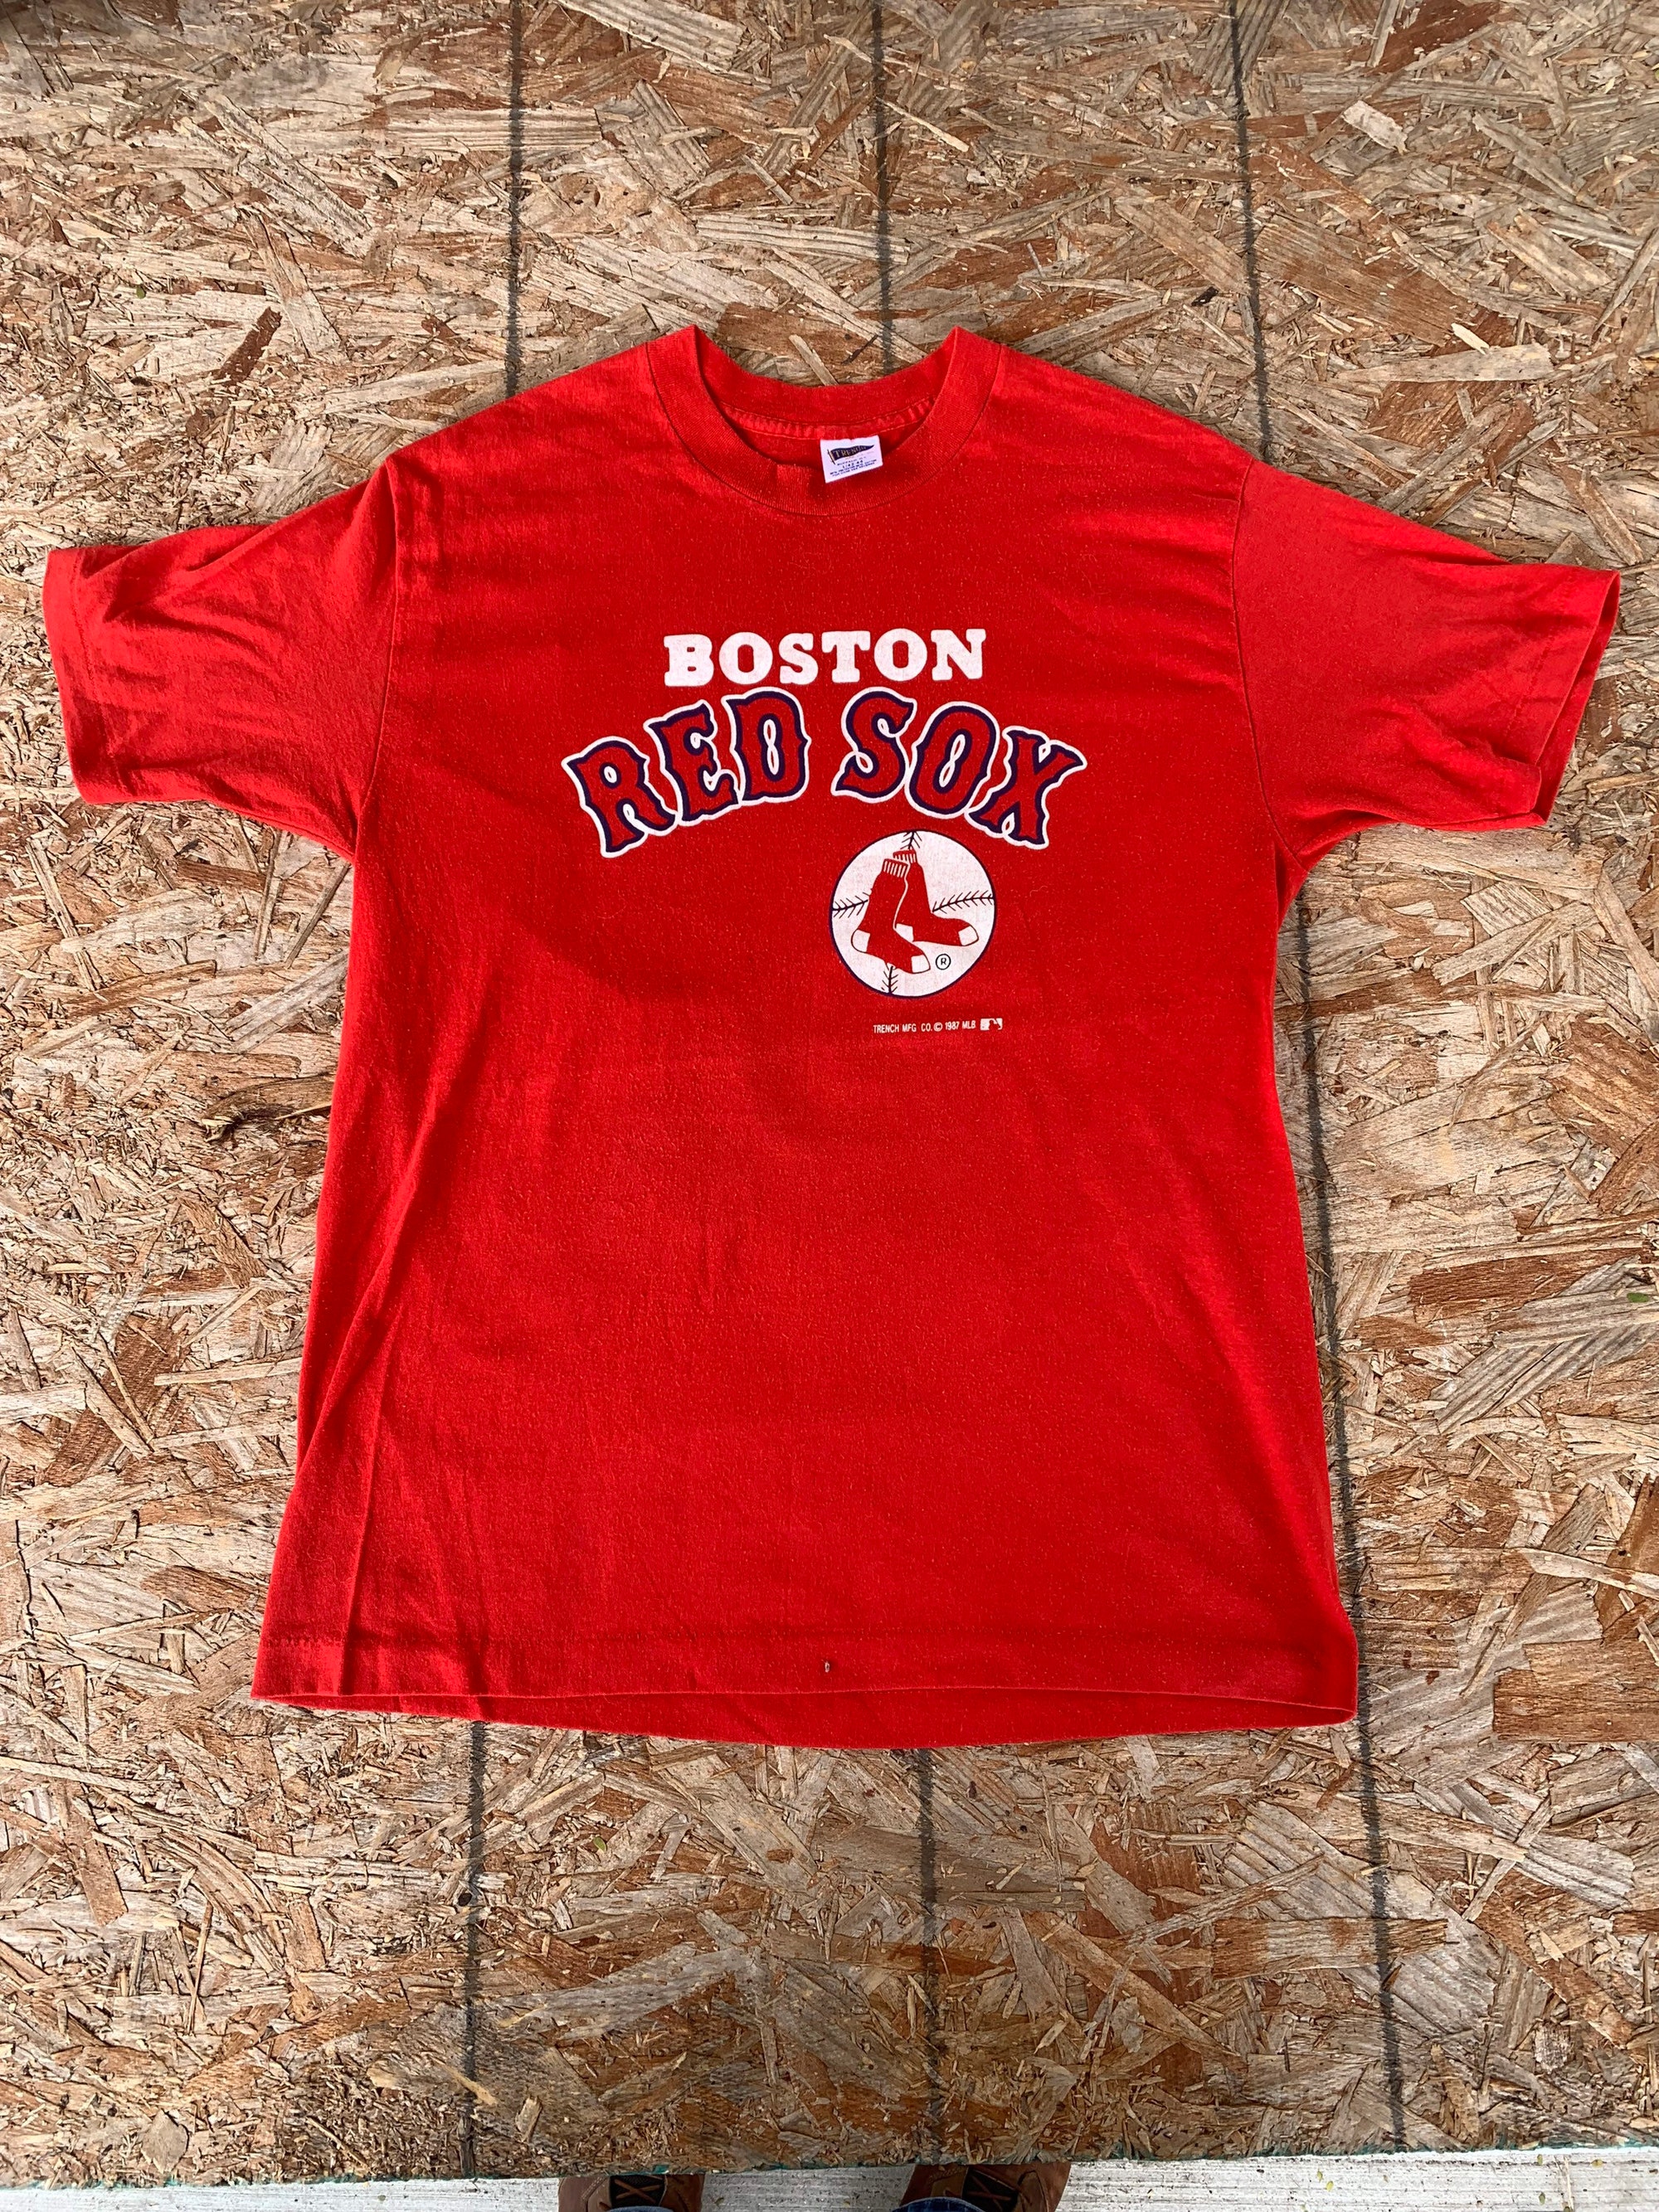 Discover Vintage 1987 Boston Red Sox T-shirt